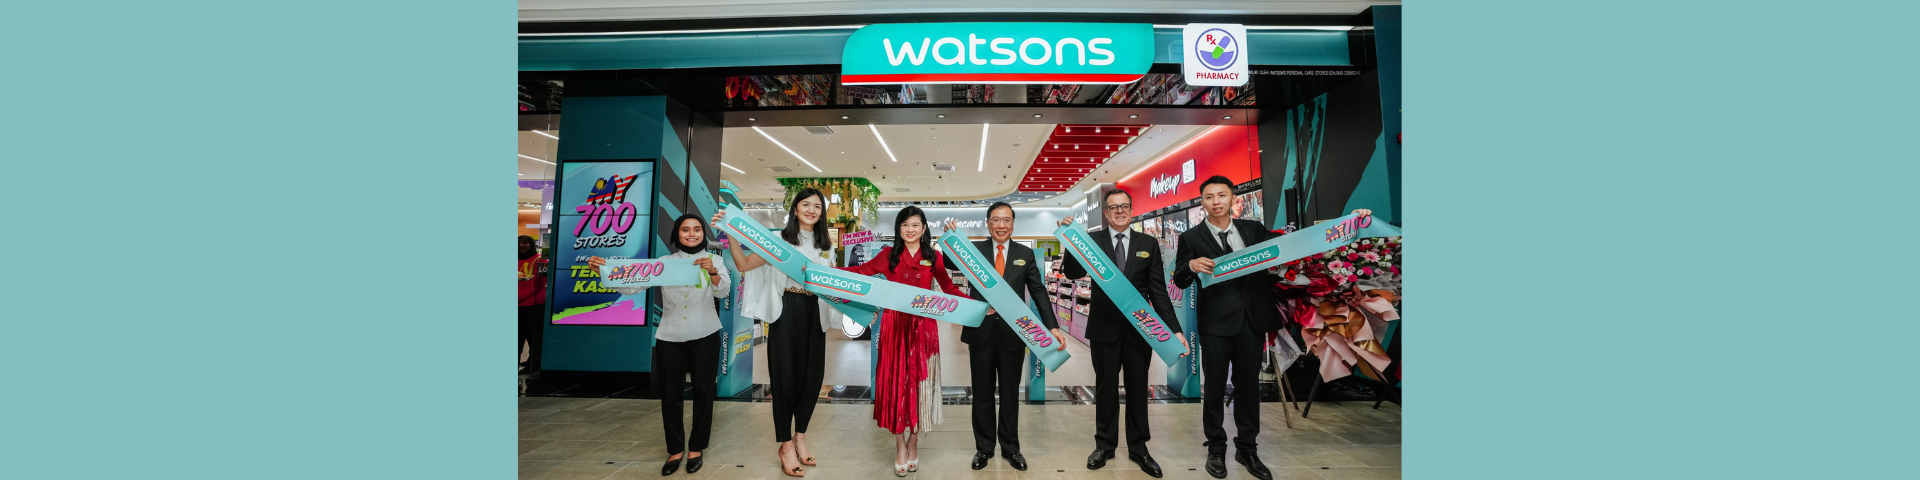 Watsons Opens Over 1,400 New Stores across Asia Amidst the Pandemic